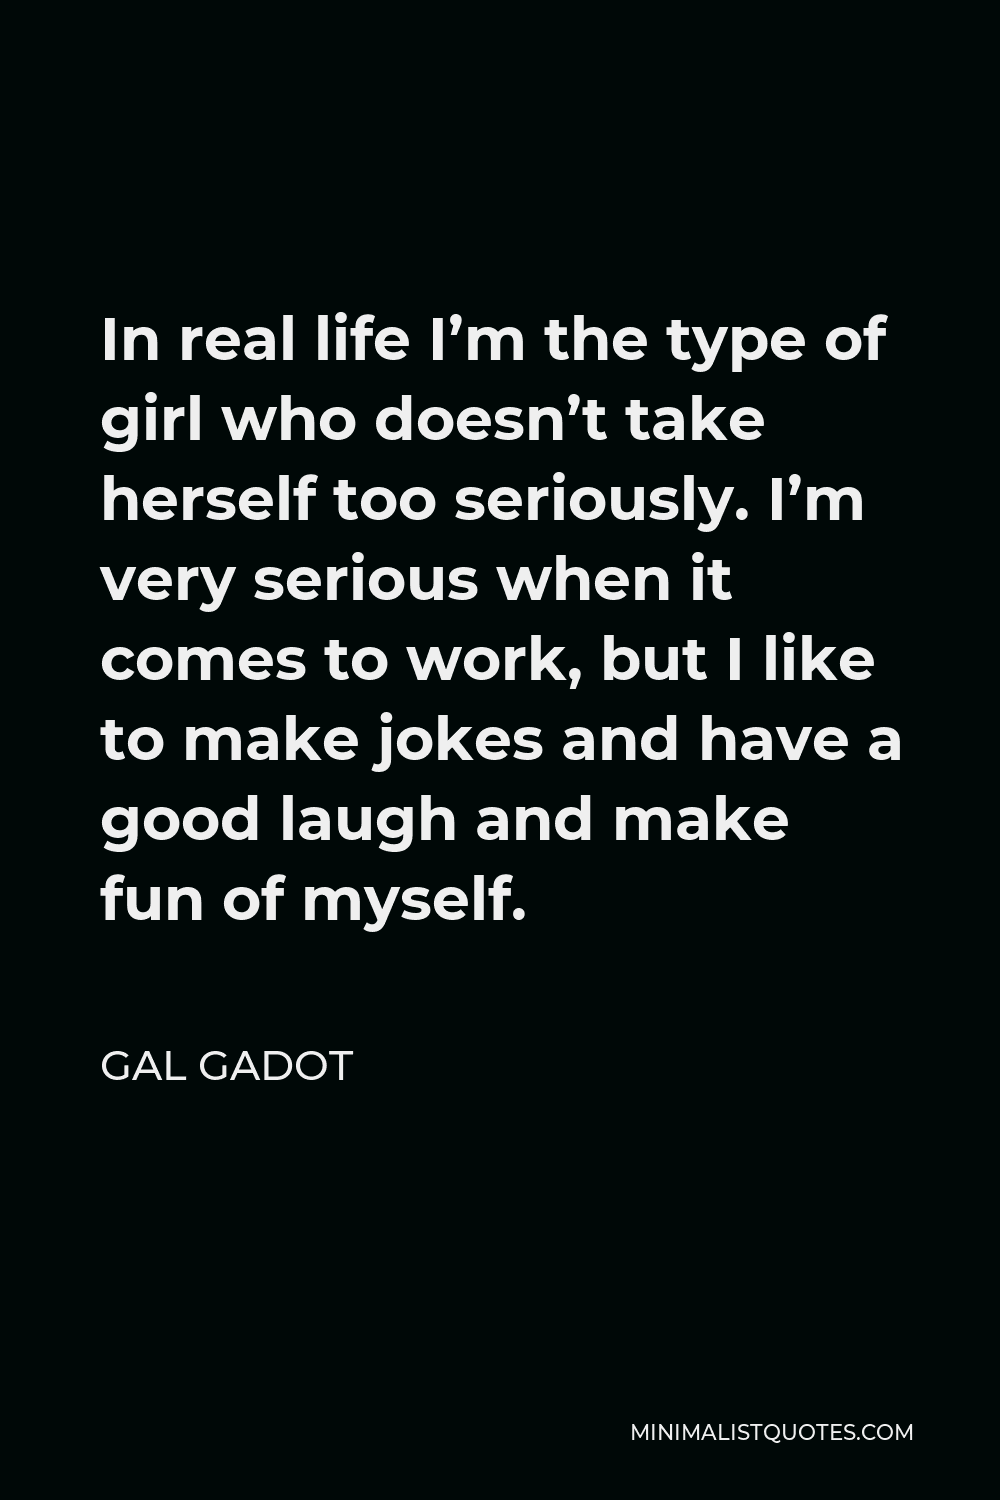 Gal Gadot Quote - In real life I’m the type of girl who doesn’t take herself too seriously. I’m very serious when it comes to work, but I like to make jokes and have a good laugh and make fun of myself.